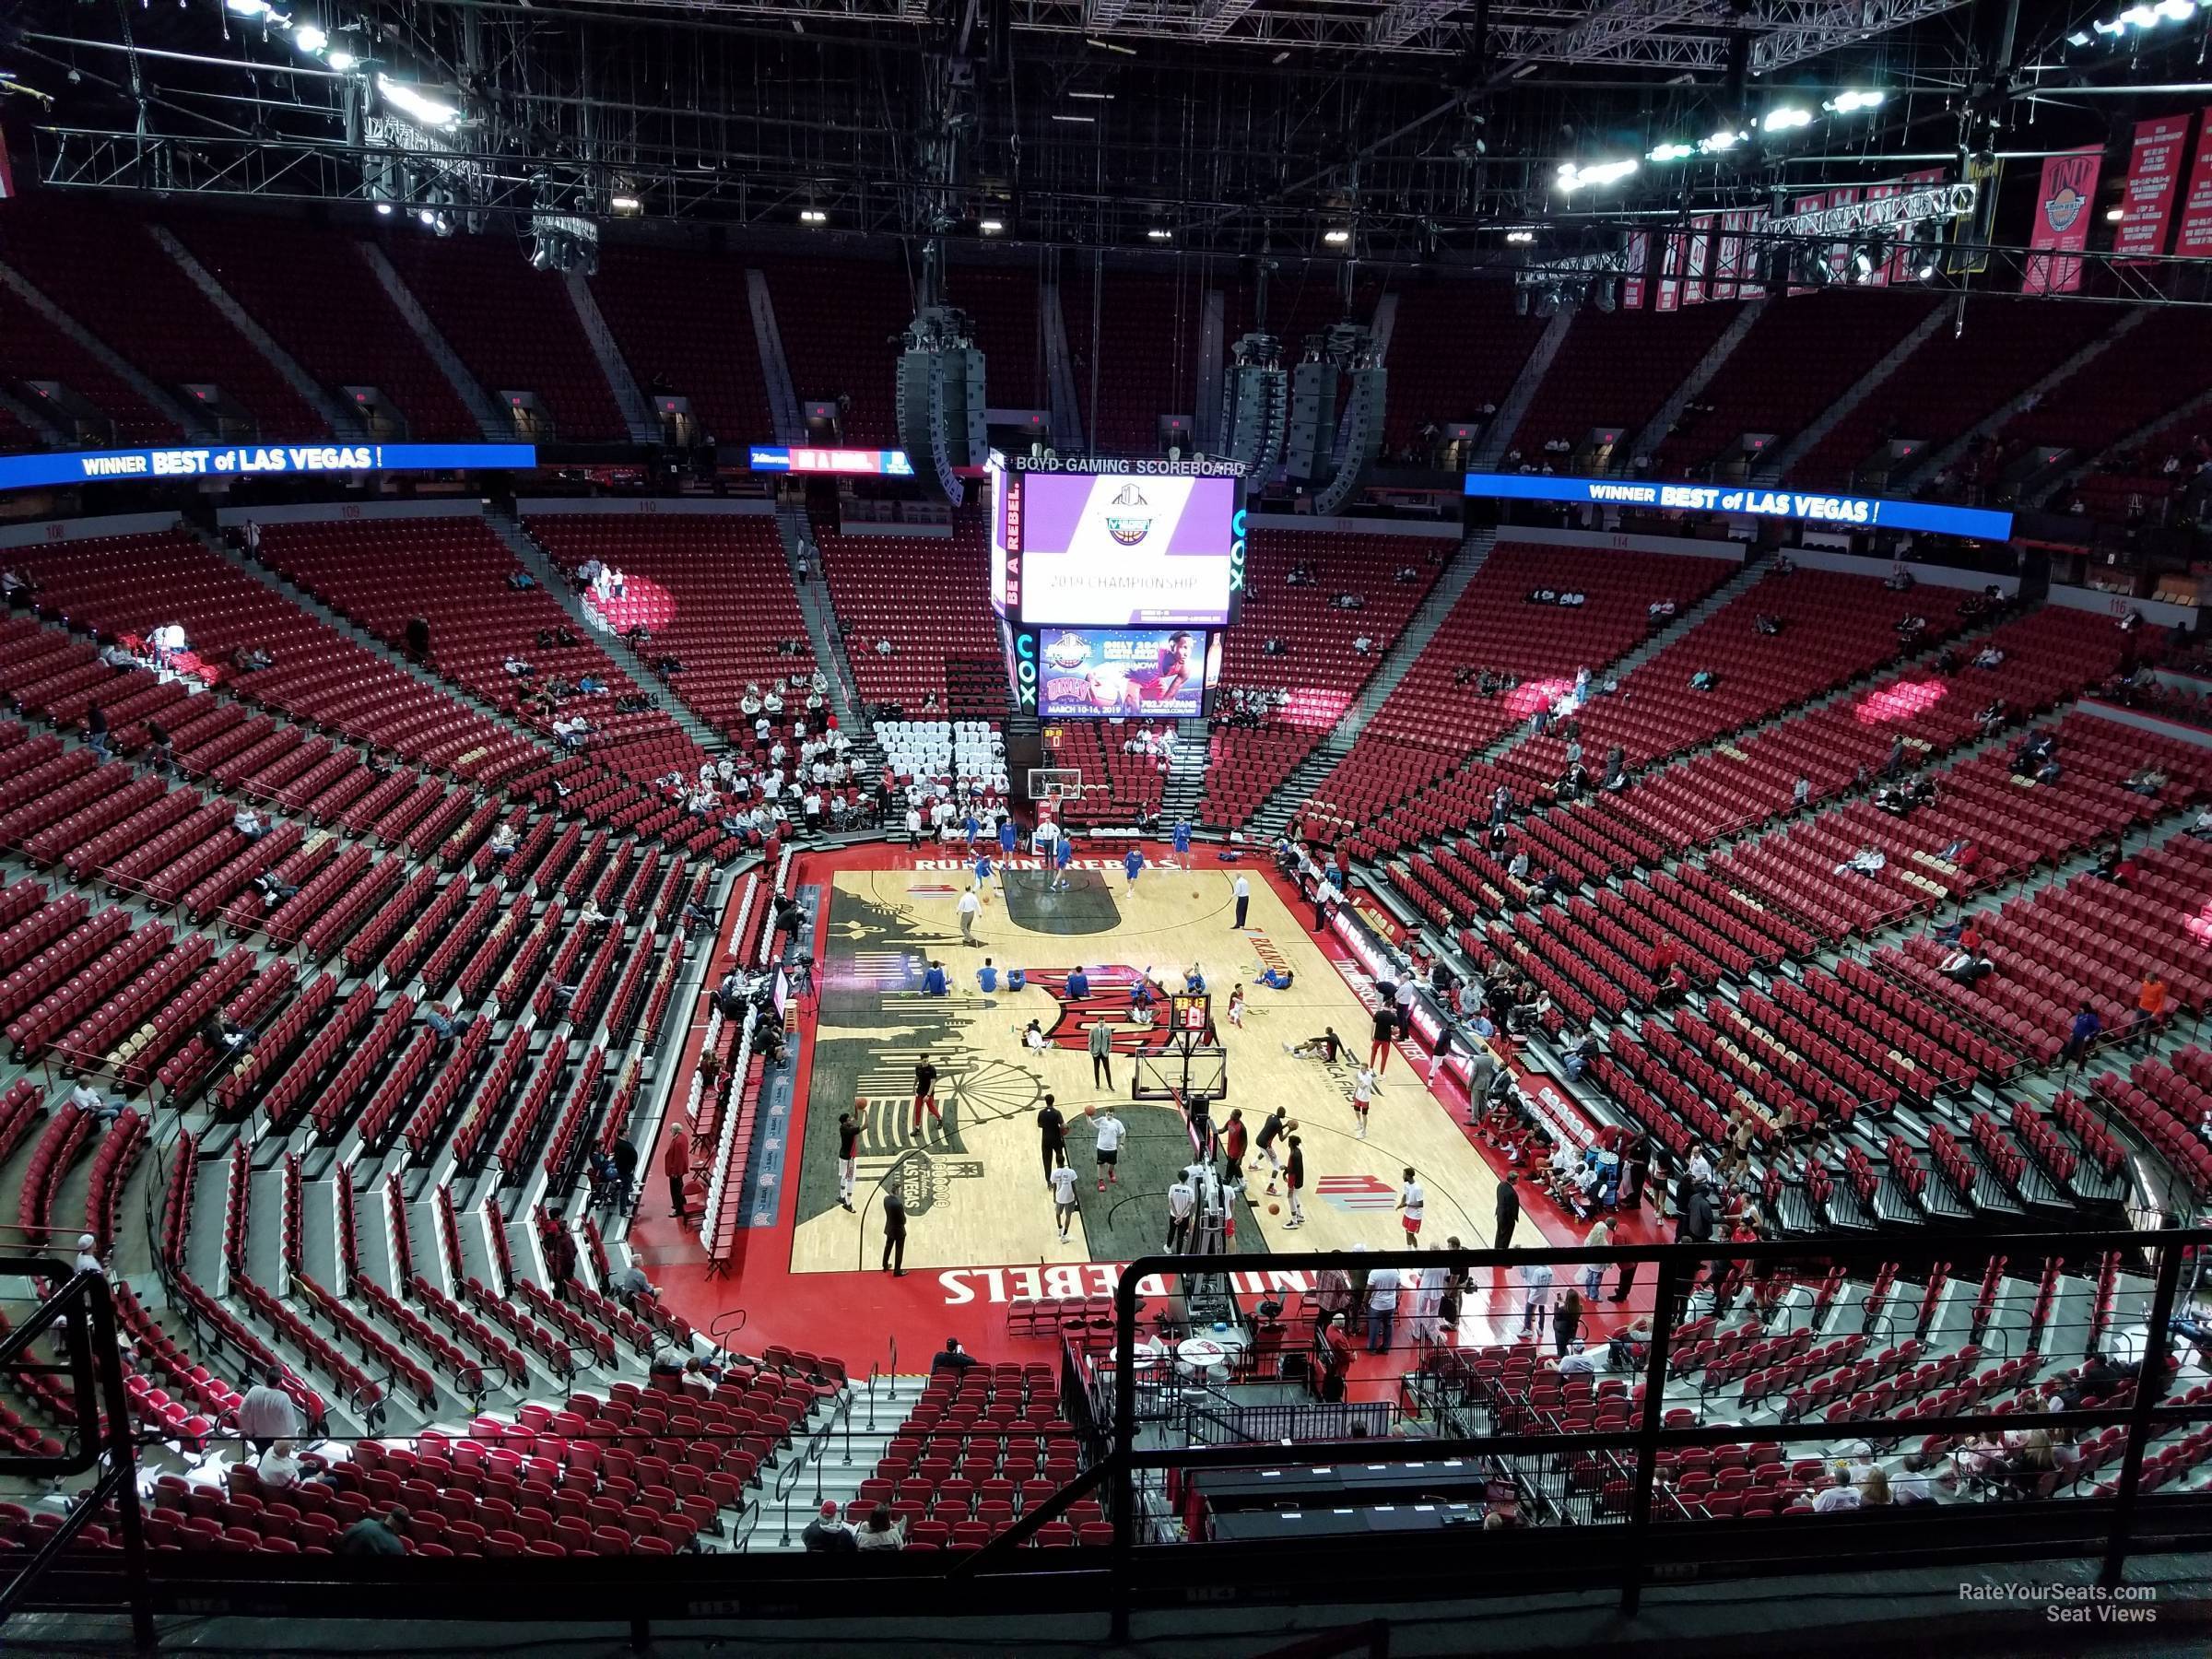 section 201, row e seat view  - thomas and mack center